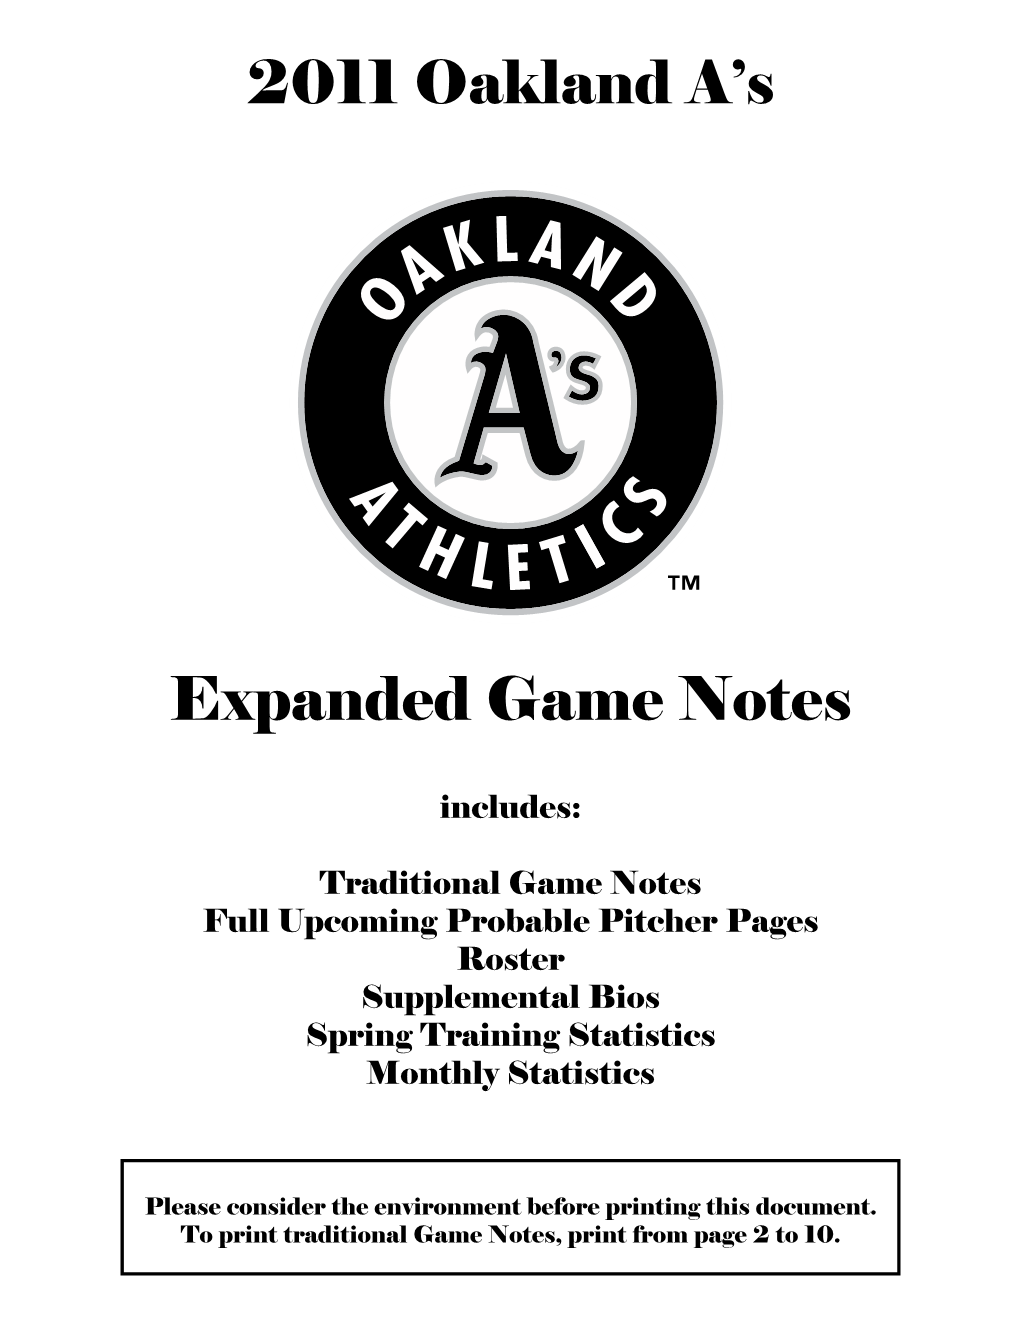 2011 Oakland A's Expanded Game Notes